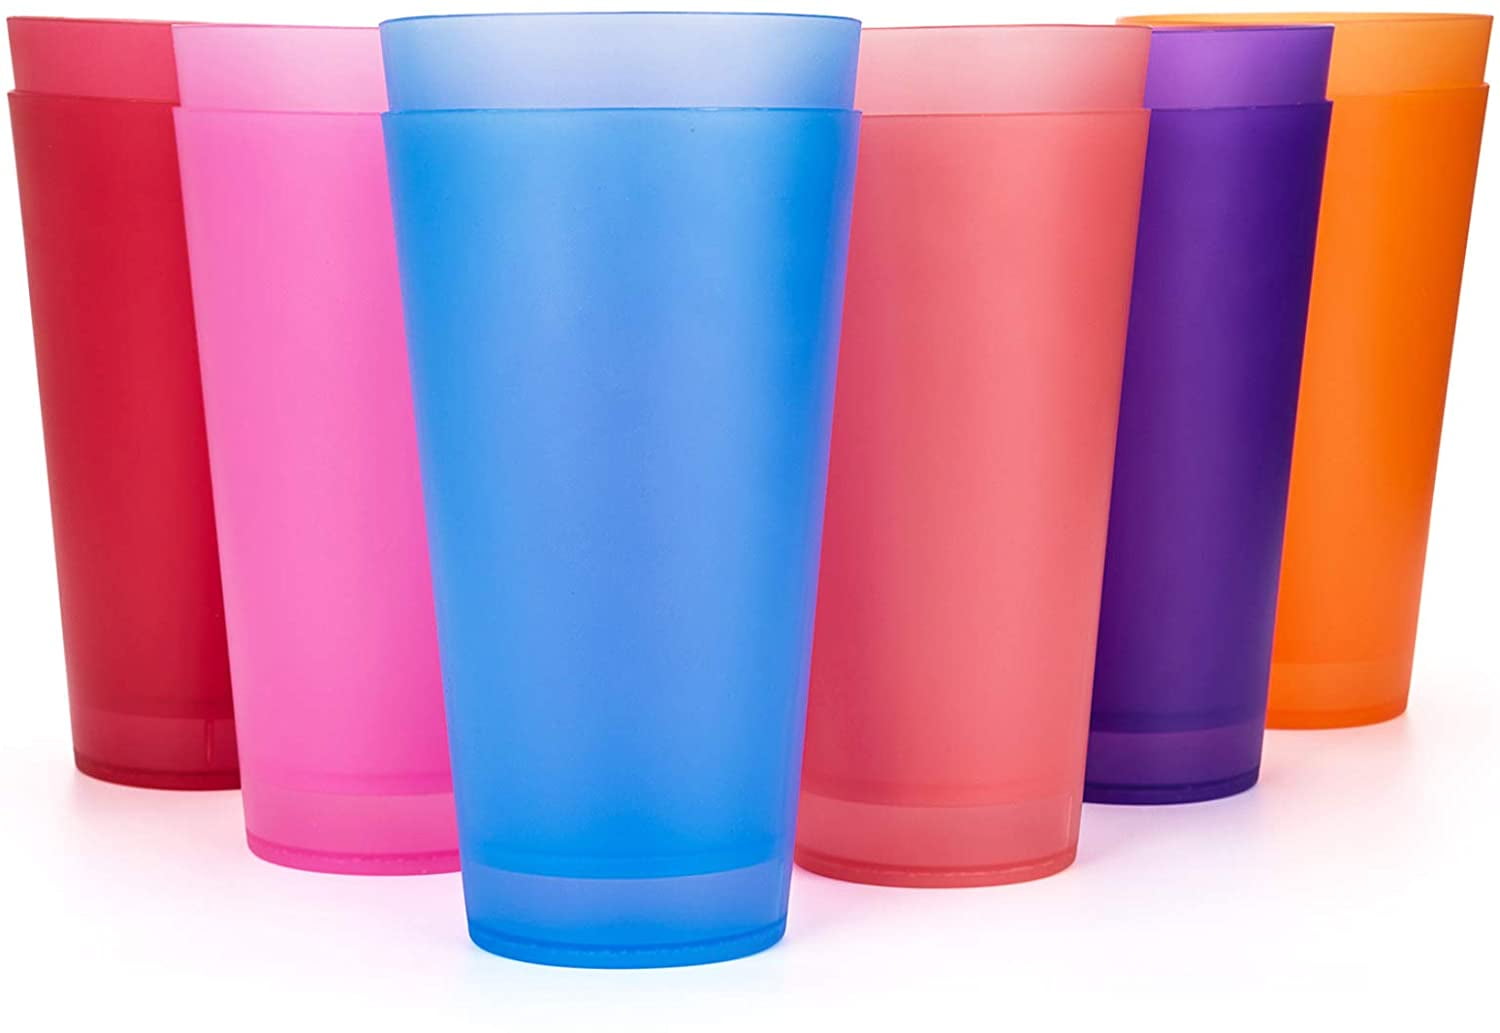 WEXINHAO 32 oz Large Plastic Cups, Durable Plastic Drinking Glasses set of  12, BPA Free Dishwasher S…See more WEXINHAO 32 oz Large Plastic Cups